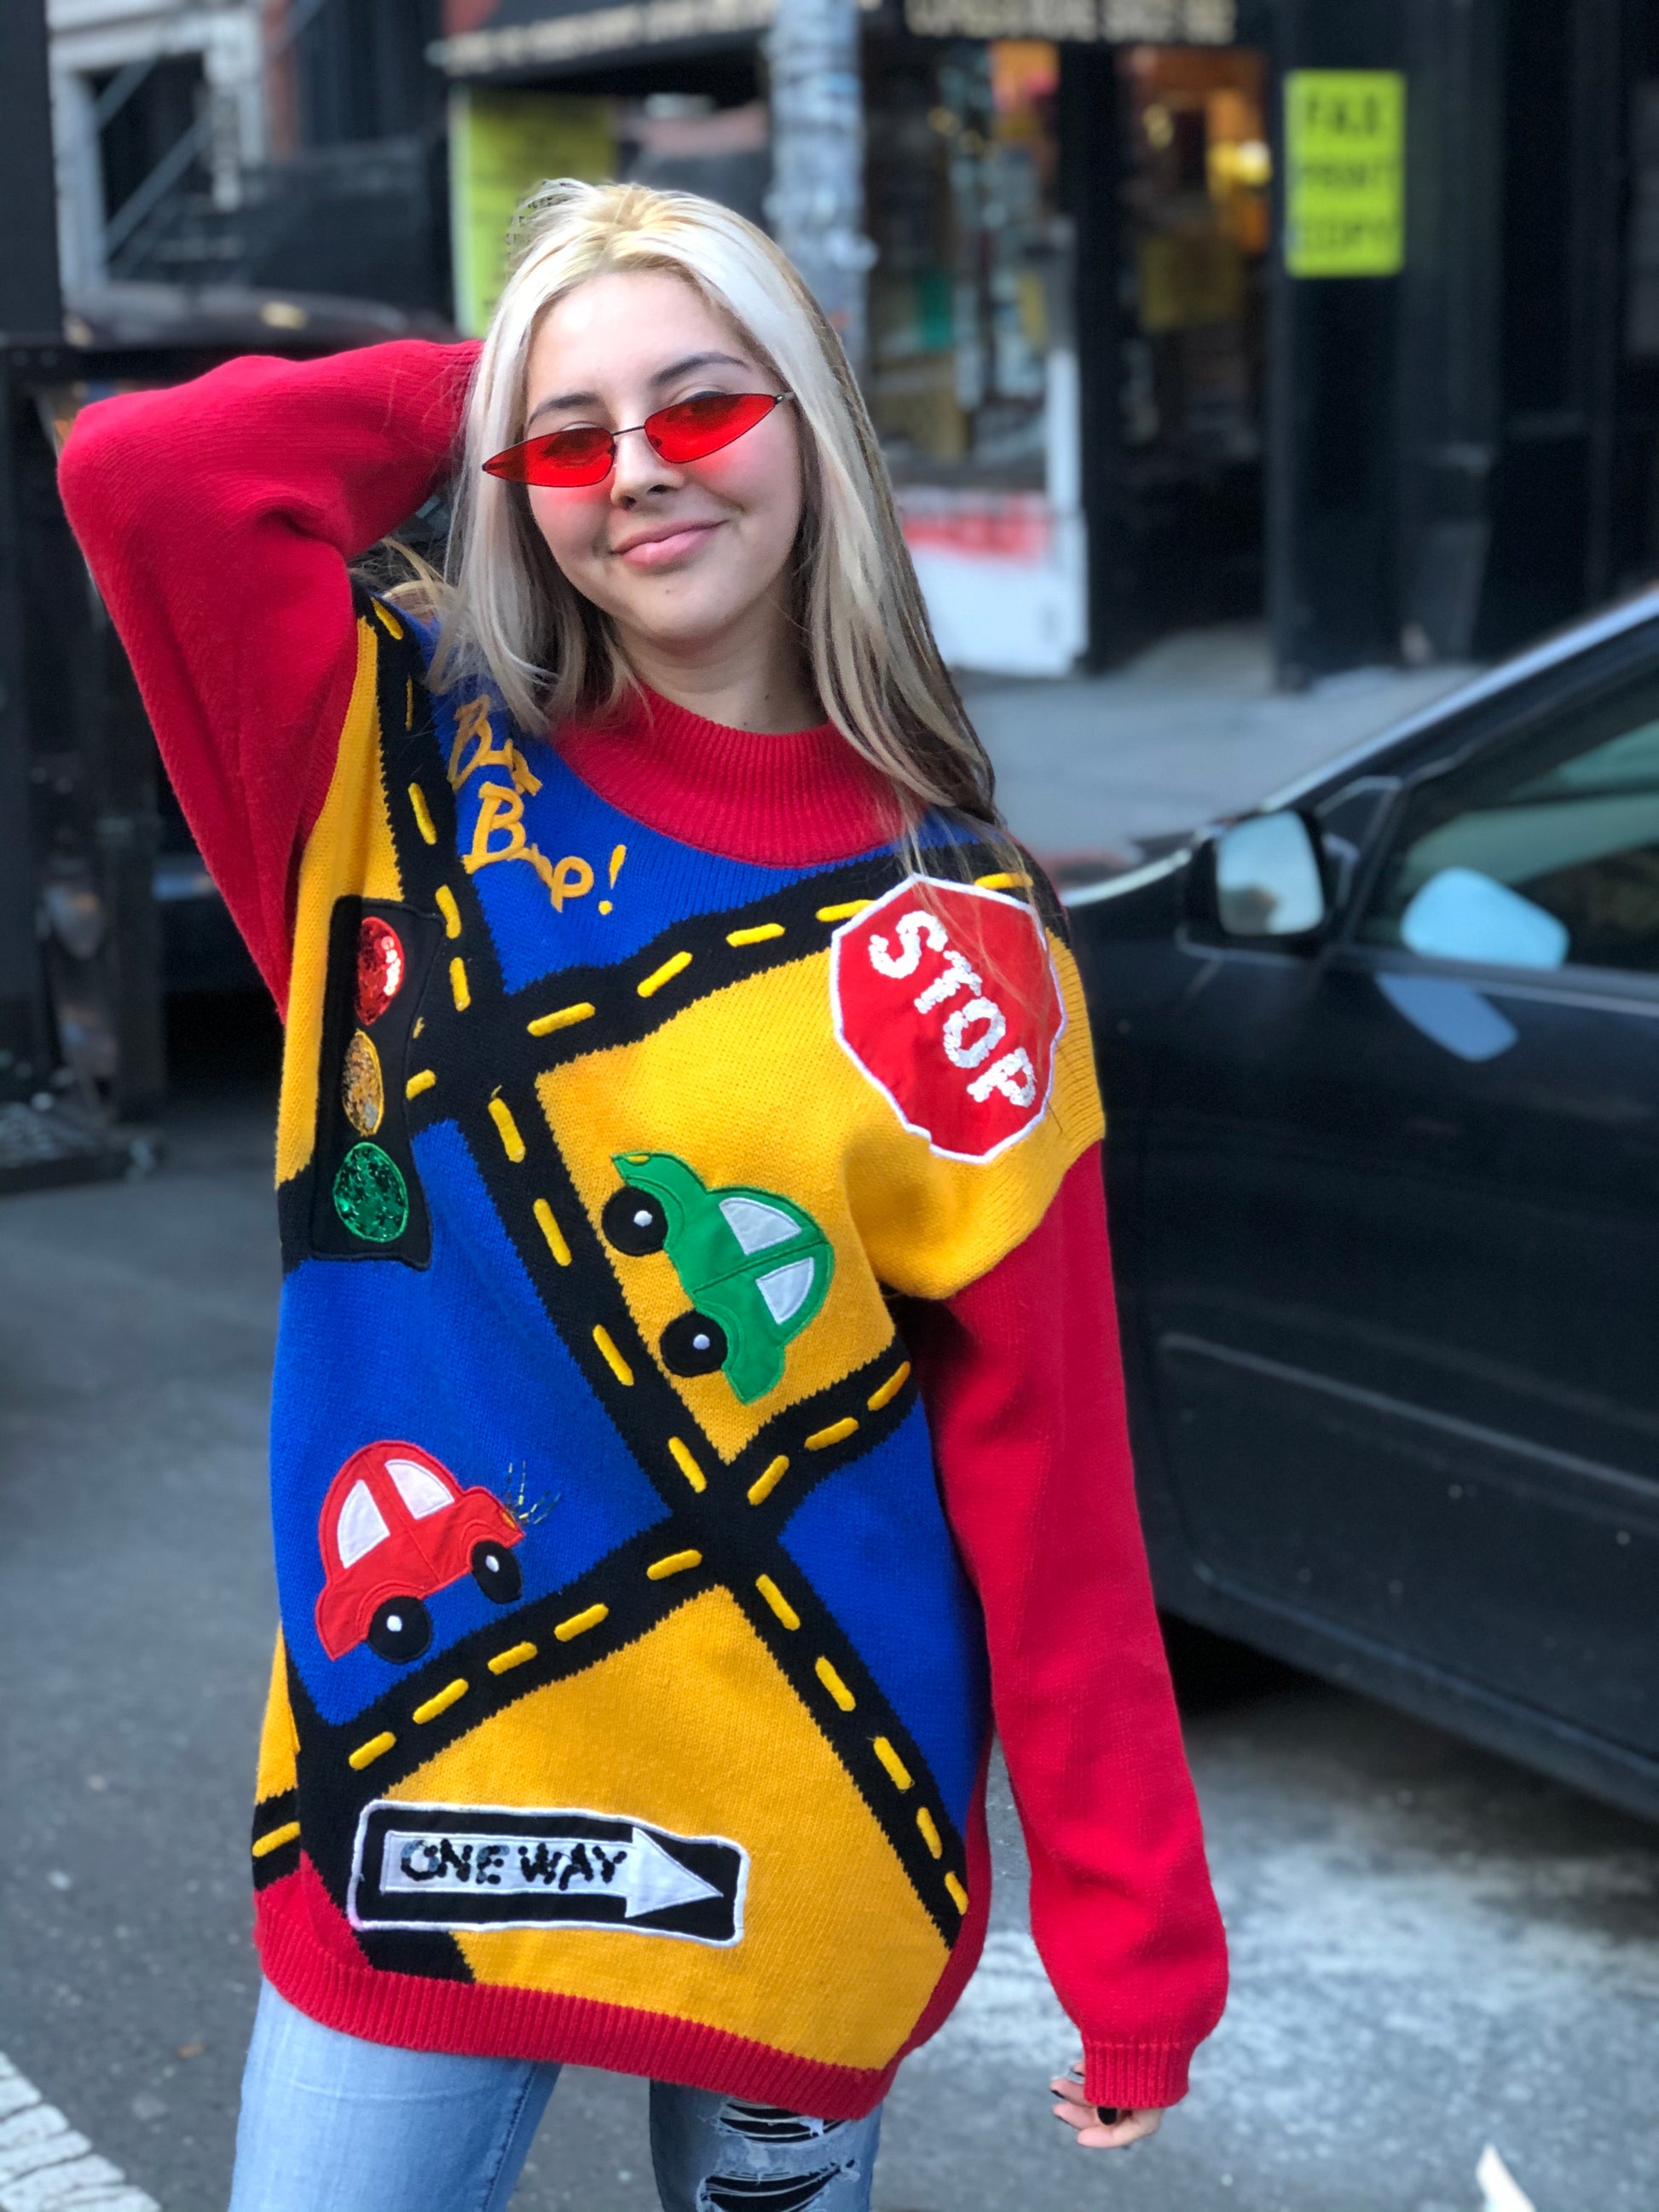 Vintage 90s Stop Traffic Sweater - Spark Pretty